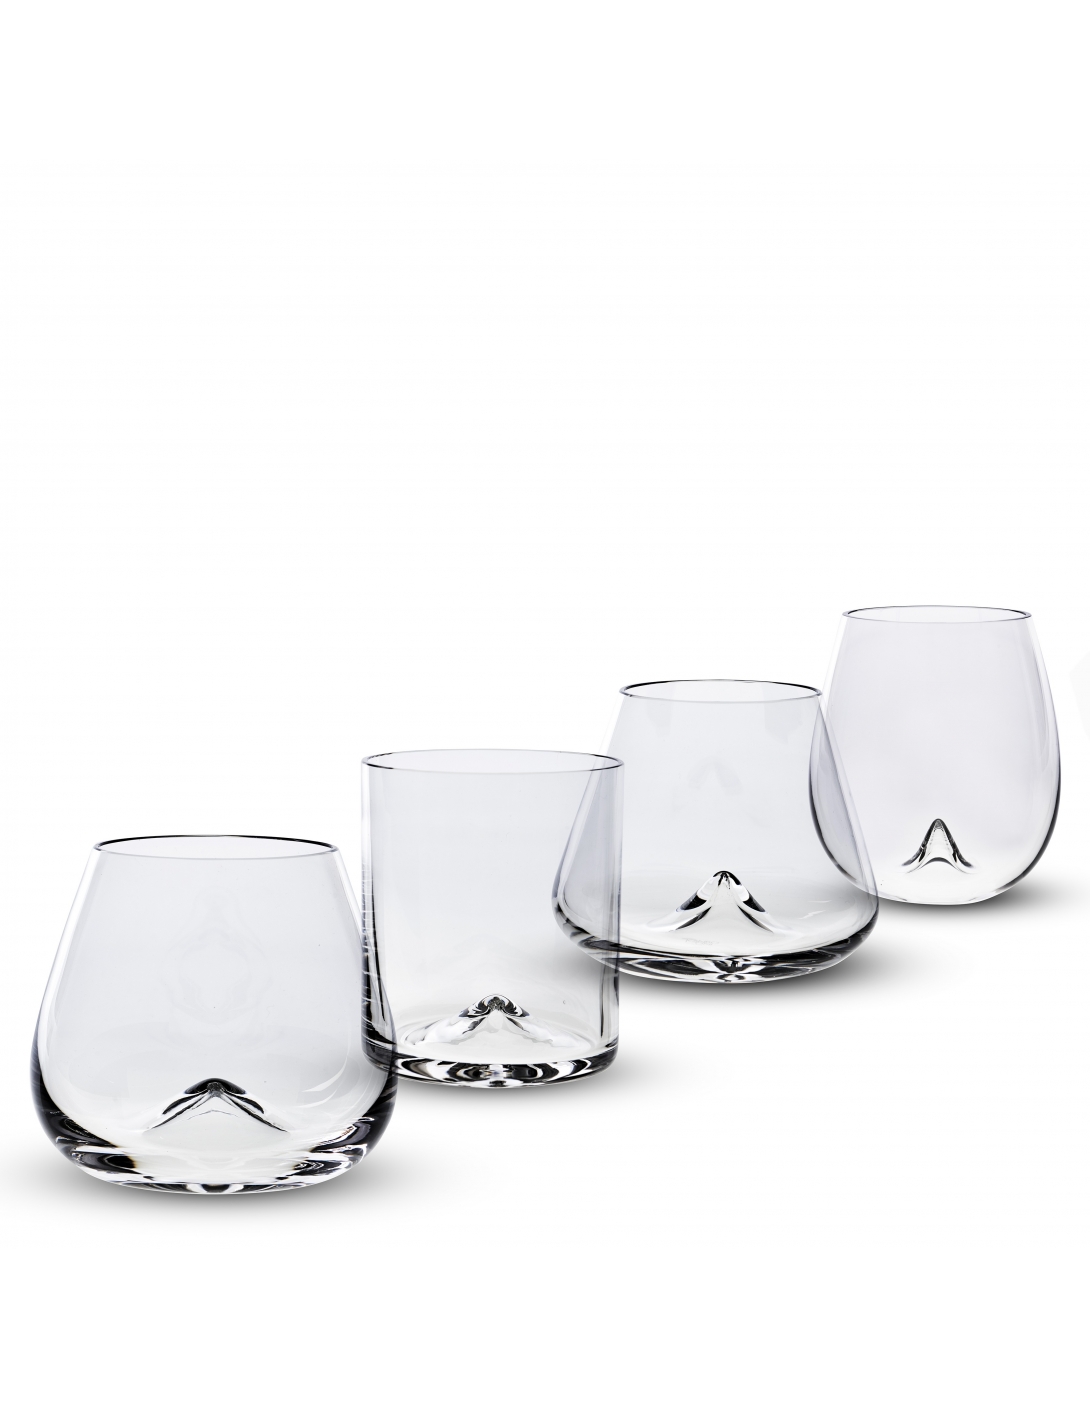 Everest set of 4 assorted tumblers